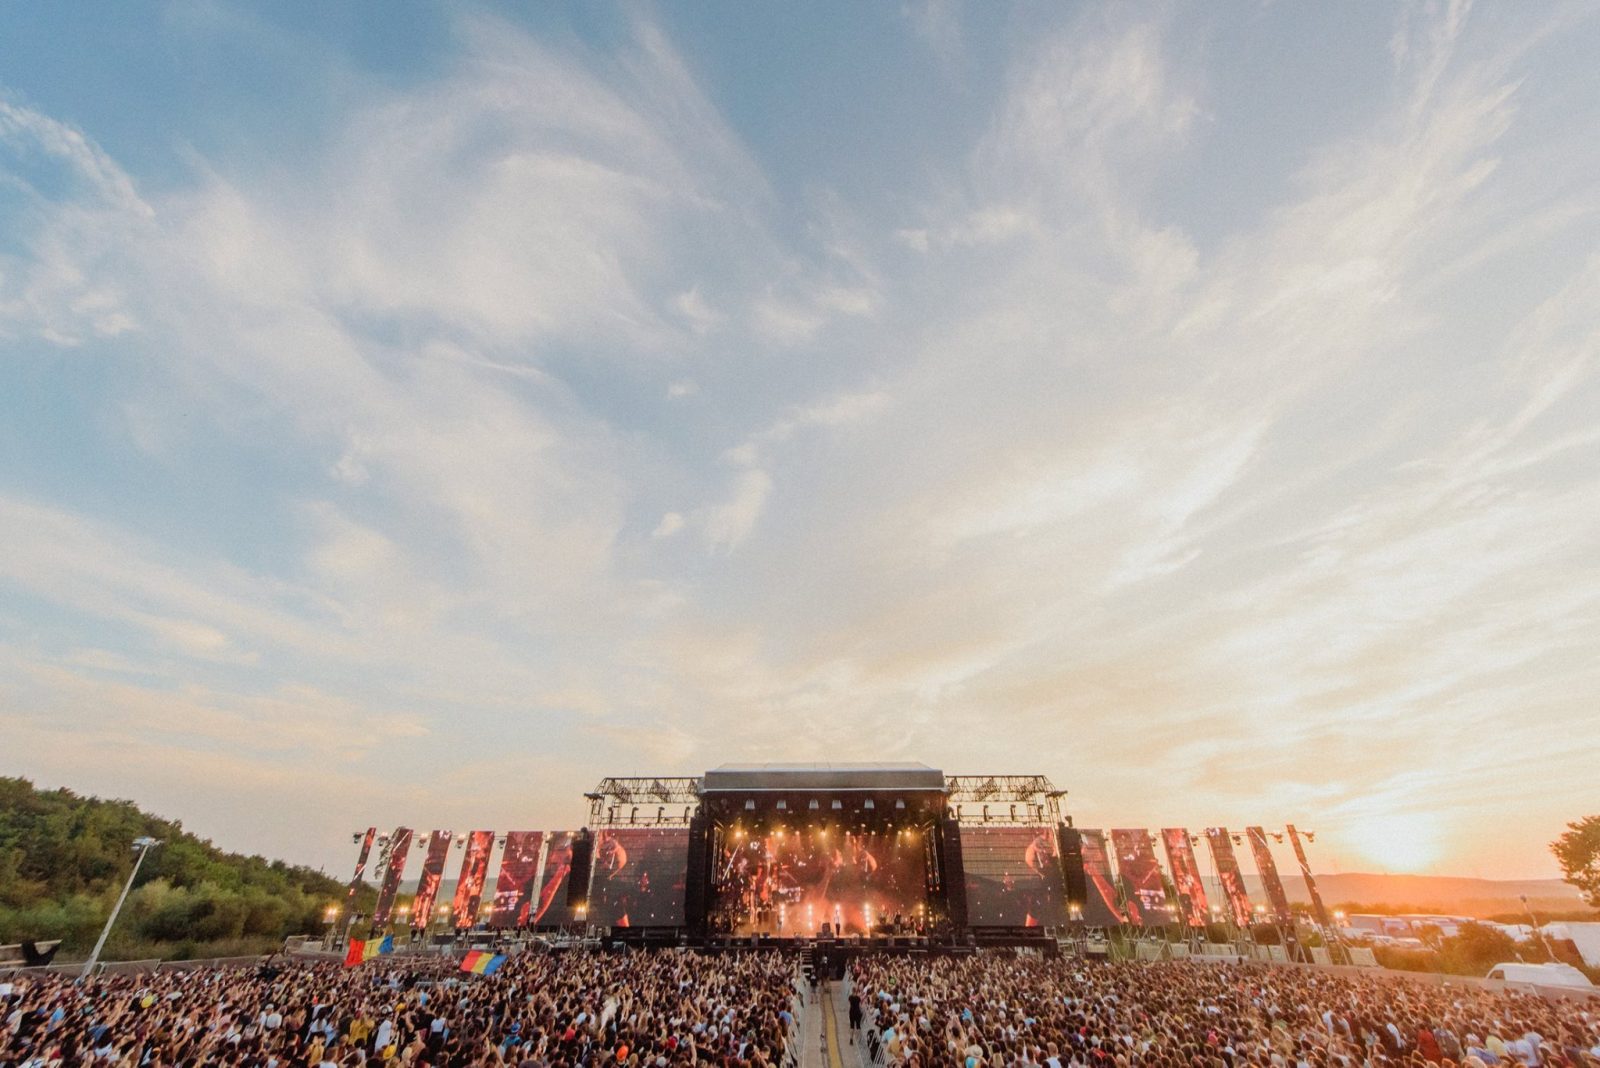 Last year's main stage